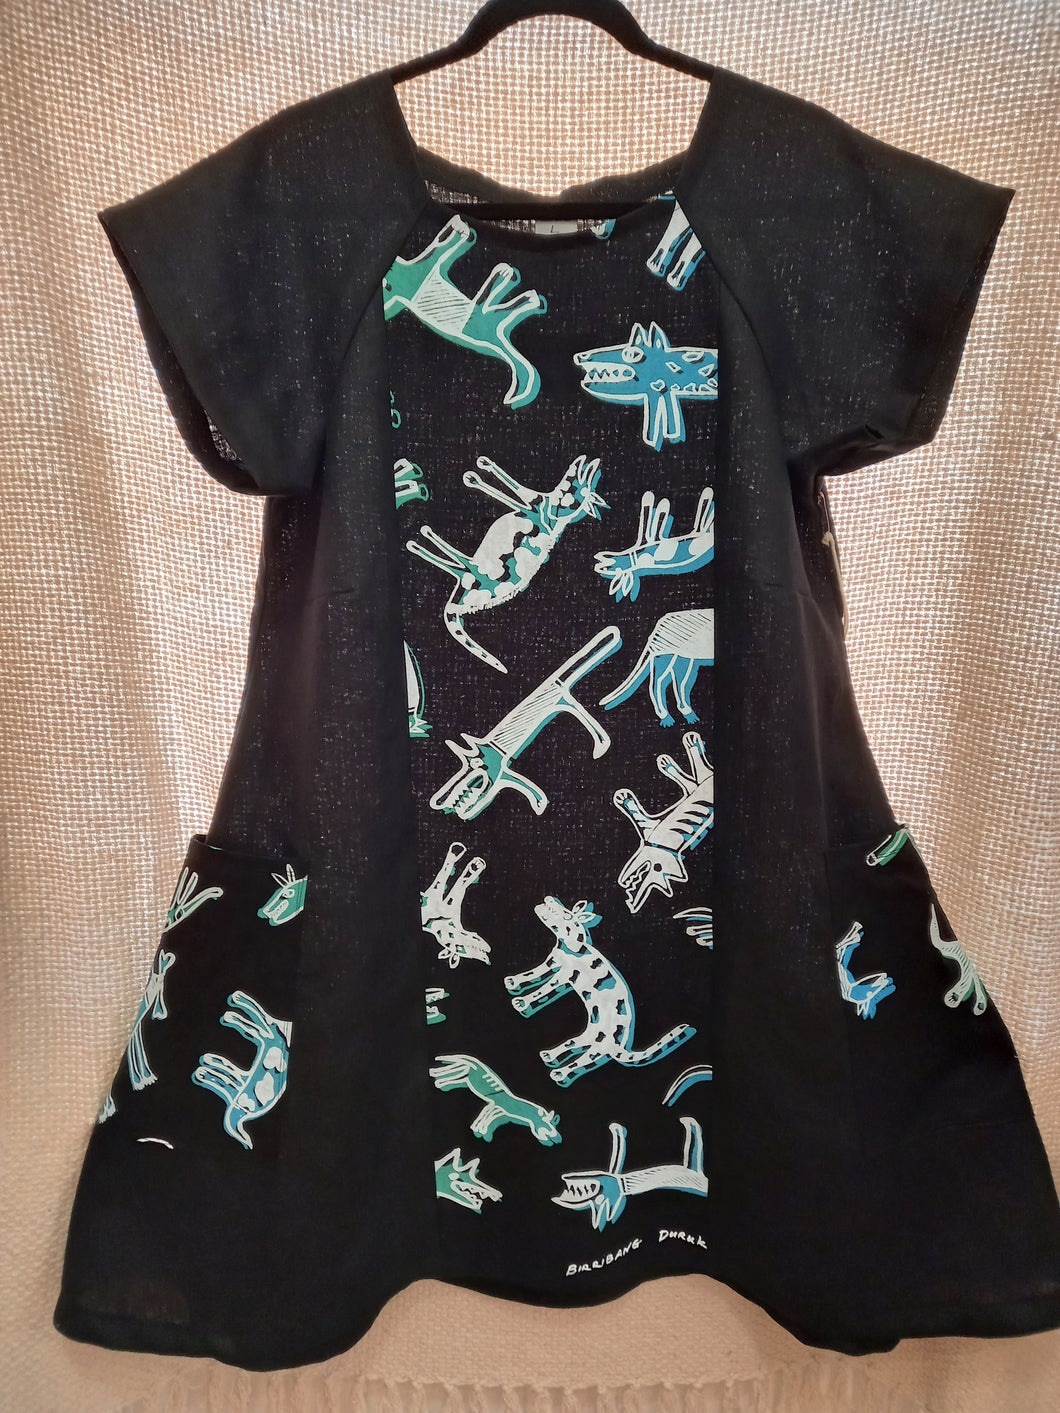 Dress: Panel with Funky Pockets (Large) Title: Too Many Cheeky dogs